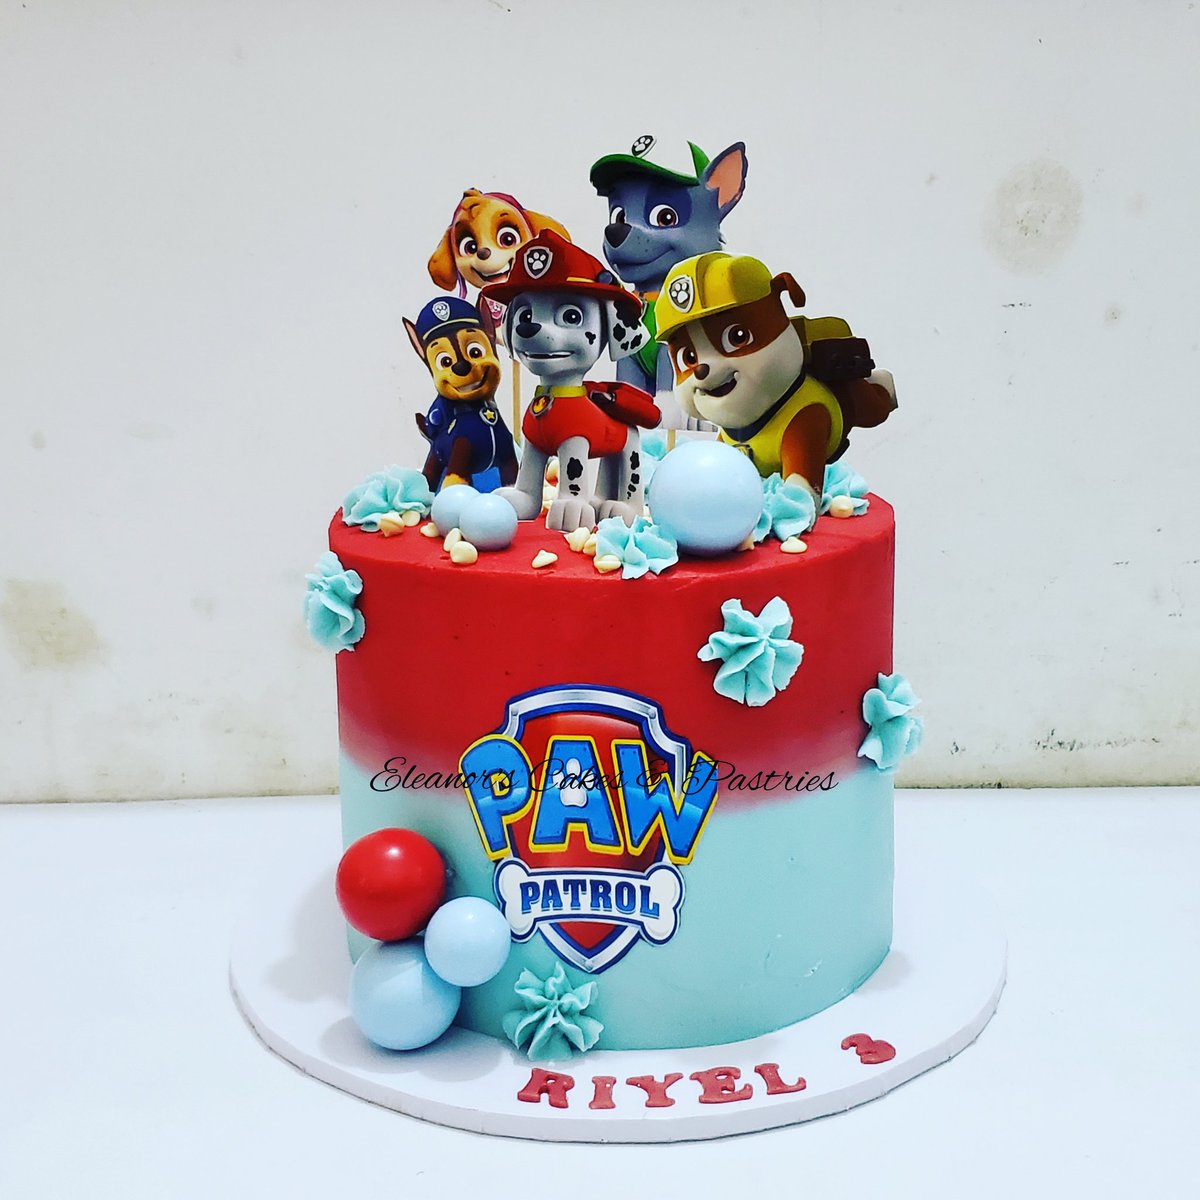 Paw patrol
Cartoon characters for kids.
Adding value to your children's big day.
#welovekids #cakesforkids #cakesforboys #cakeshopsinlimbe